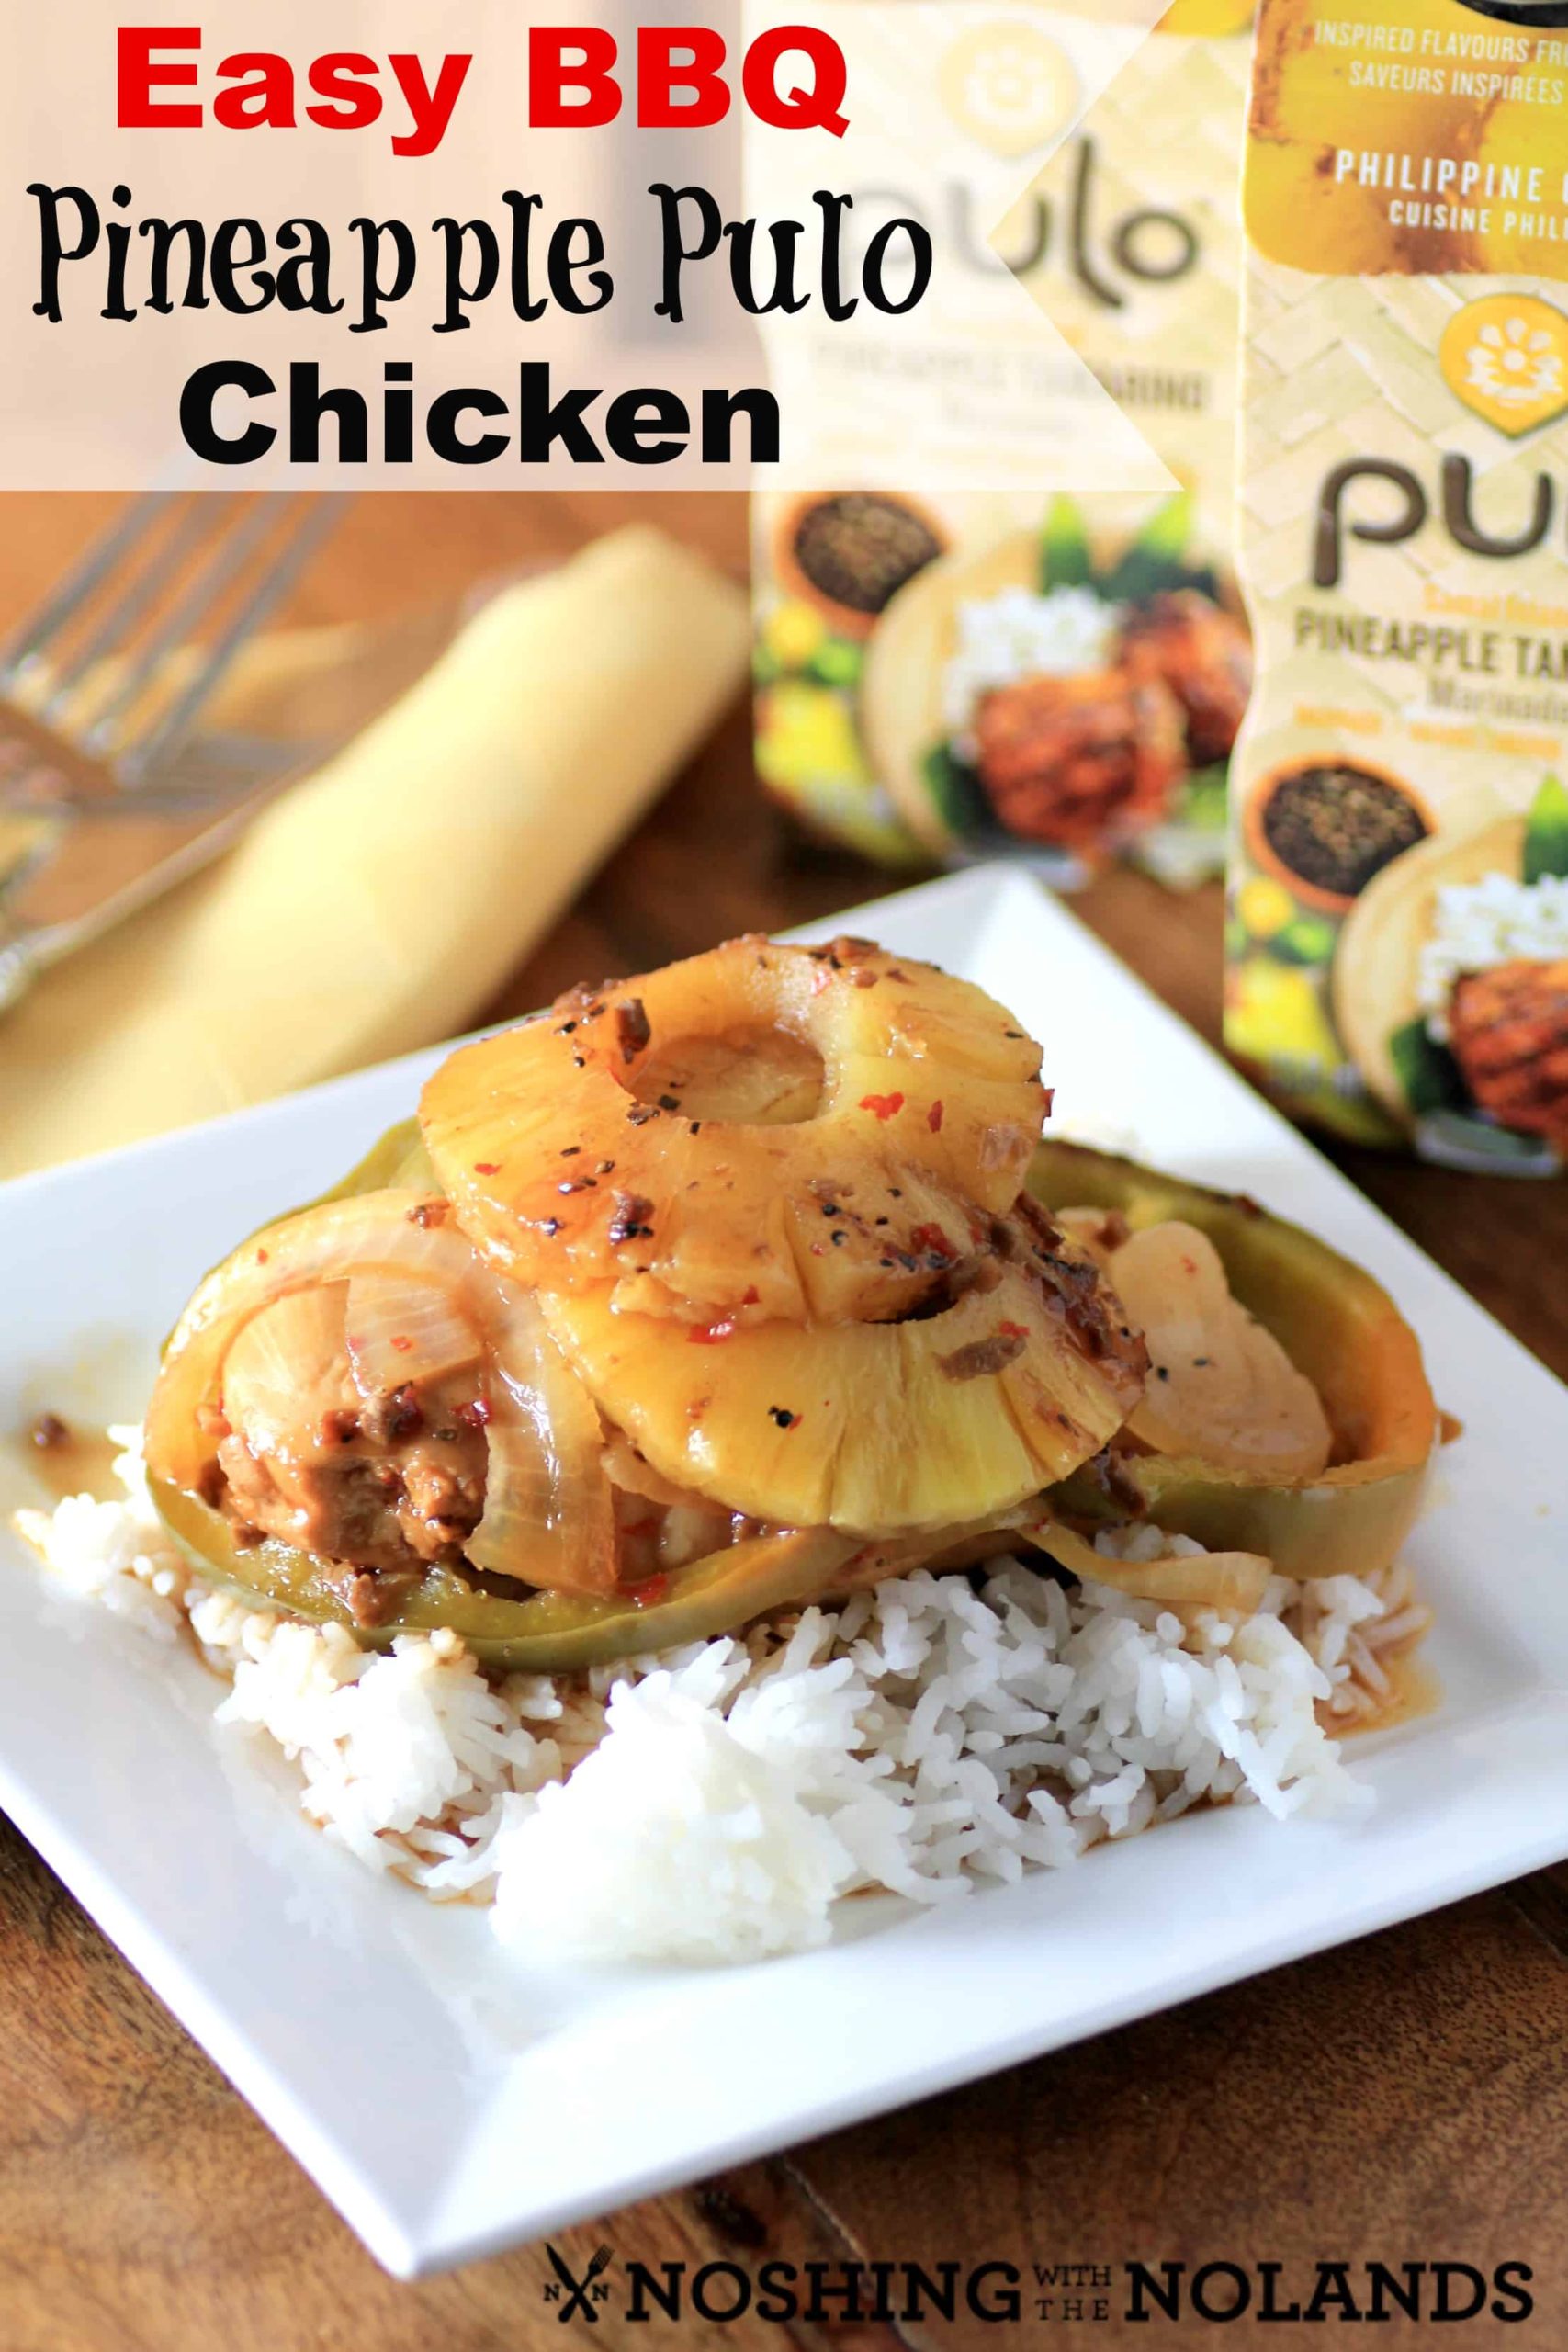 Easy BBQ Pineapple Pulo Chicken by Noshing With The Nolands